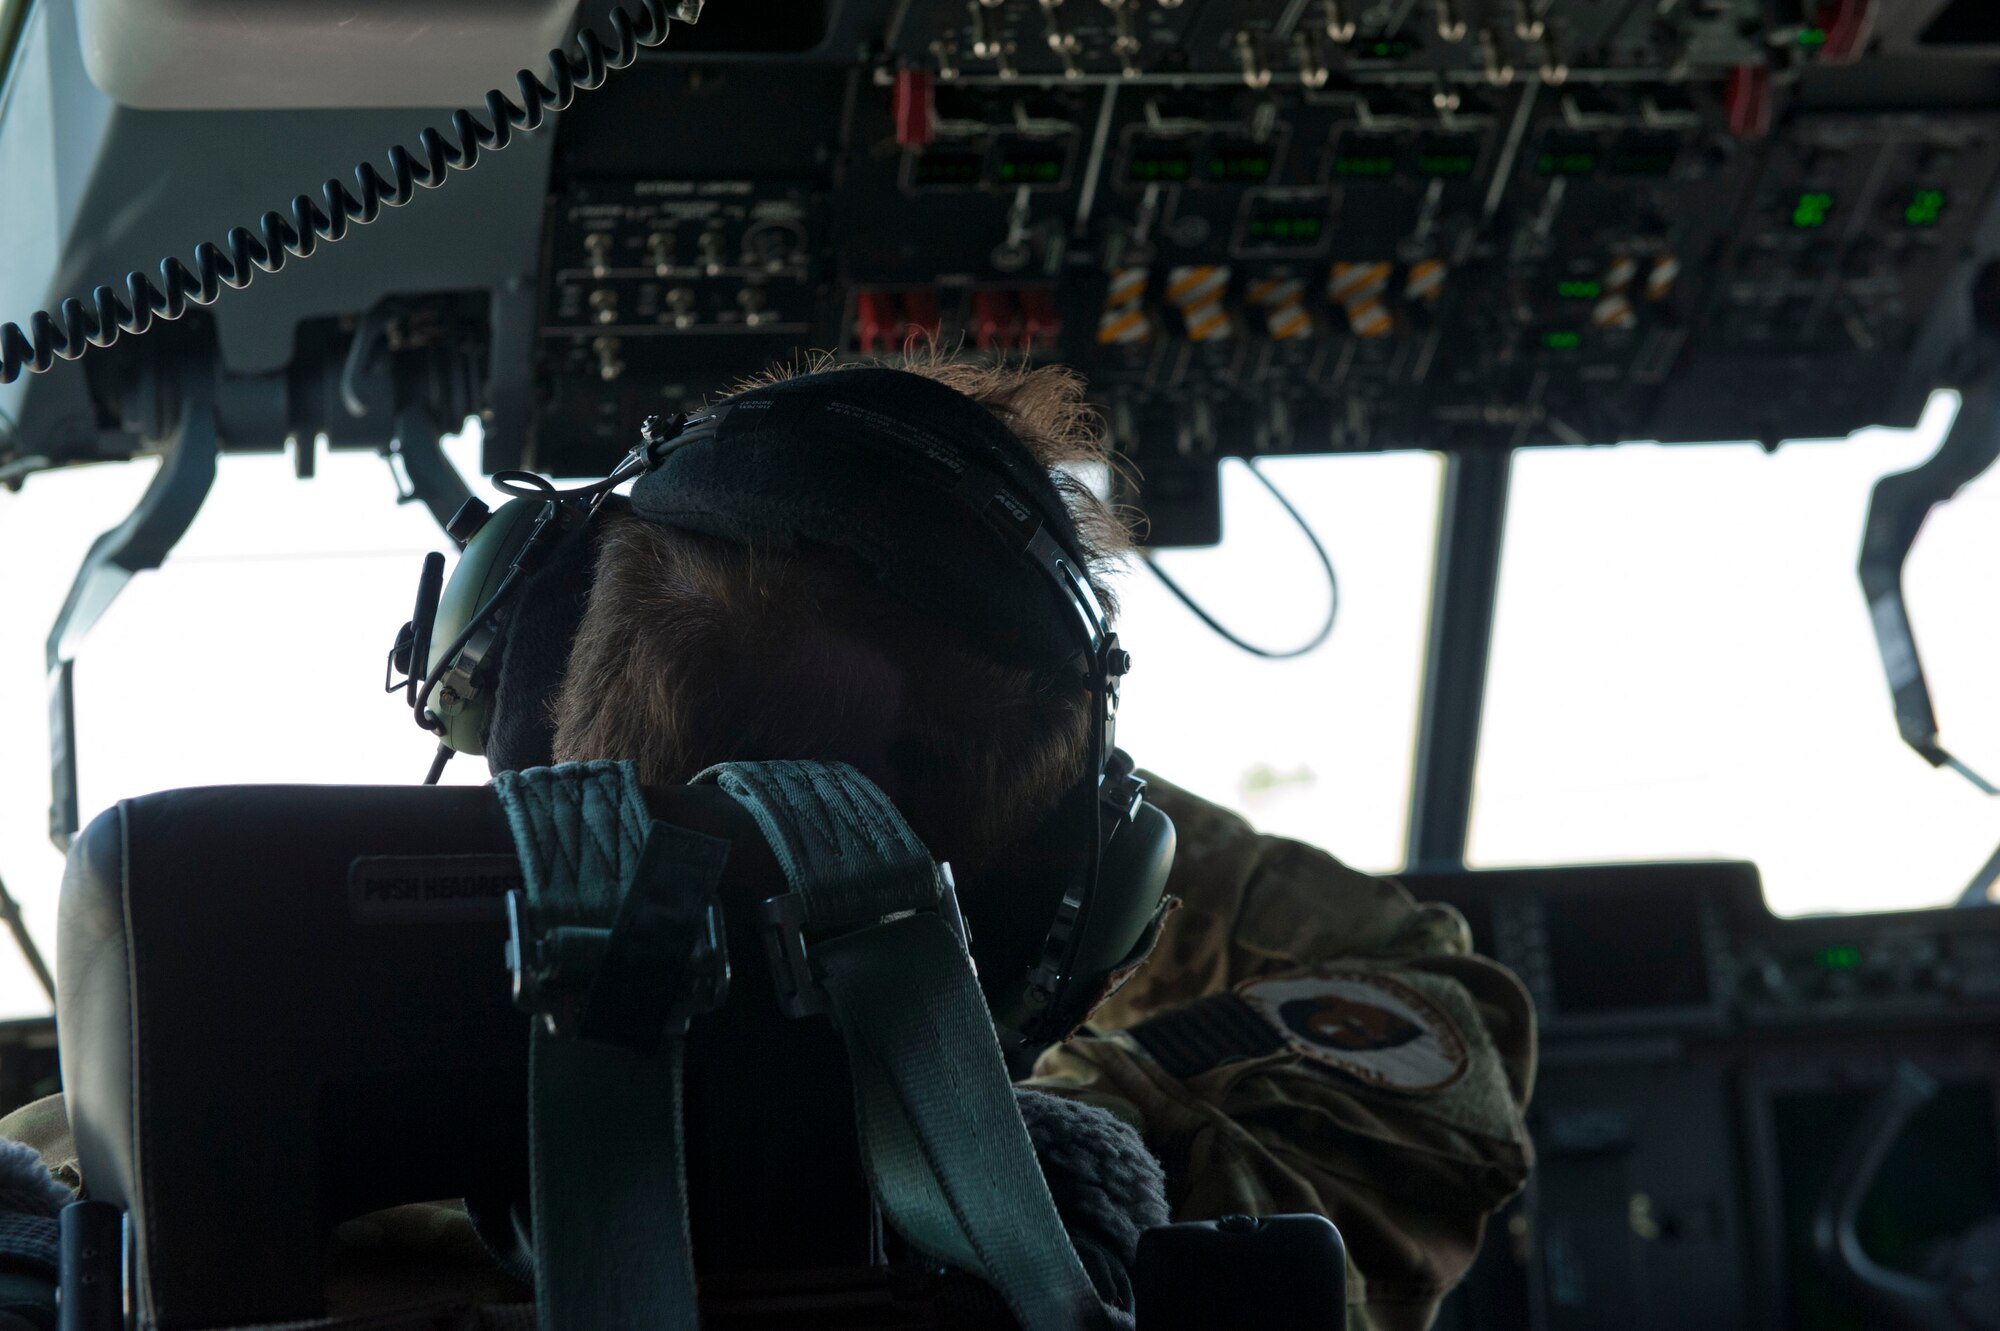 Capt. Andrew Campbell, 774th Expeditionary Airlift Squadron C-130J Super Hercules pilot, conducts pre-flight operations, Bagram Airfield, Afghanistan, Aug. 19, 2016. Campbell along with other Airmen from the 774th EAS were
preparing to deliver cargo and fuel to Camp Dwyer, Afghanistan. (U.S. Air Force photo by Capt. Korey Fratini)